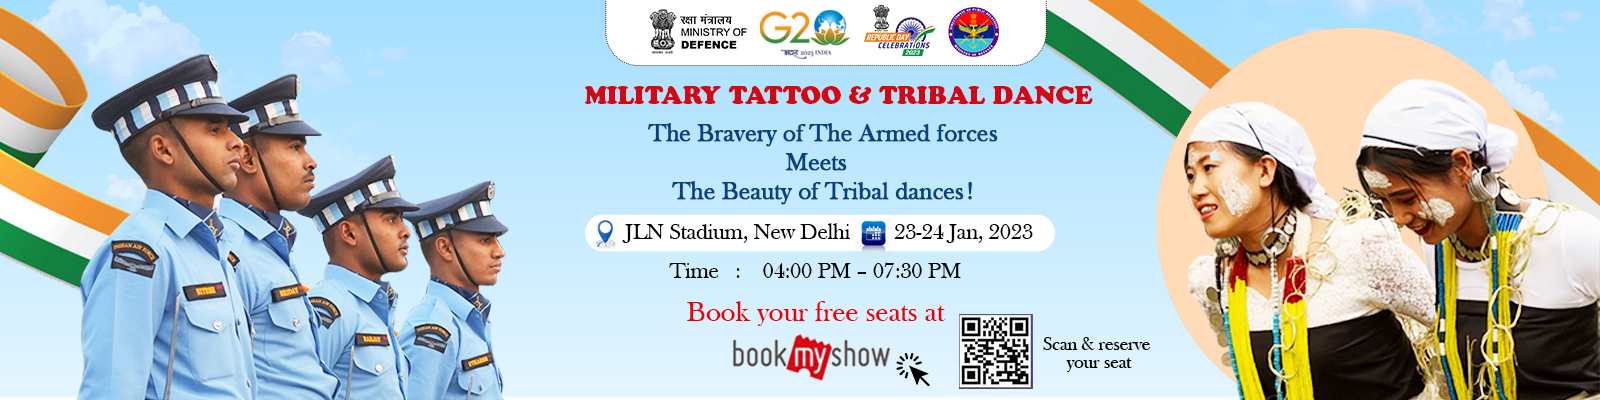 BANNER OF MILITARY TATTOO & TRIBAL DANCE ACTIVITY FOR PUBLICITY